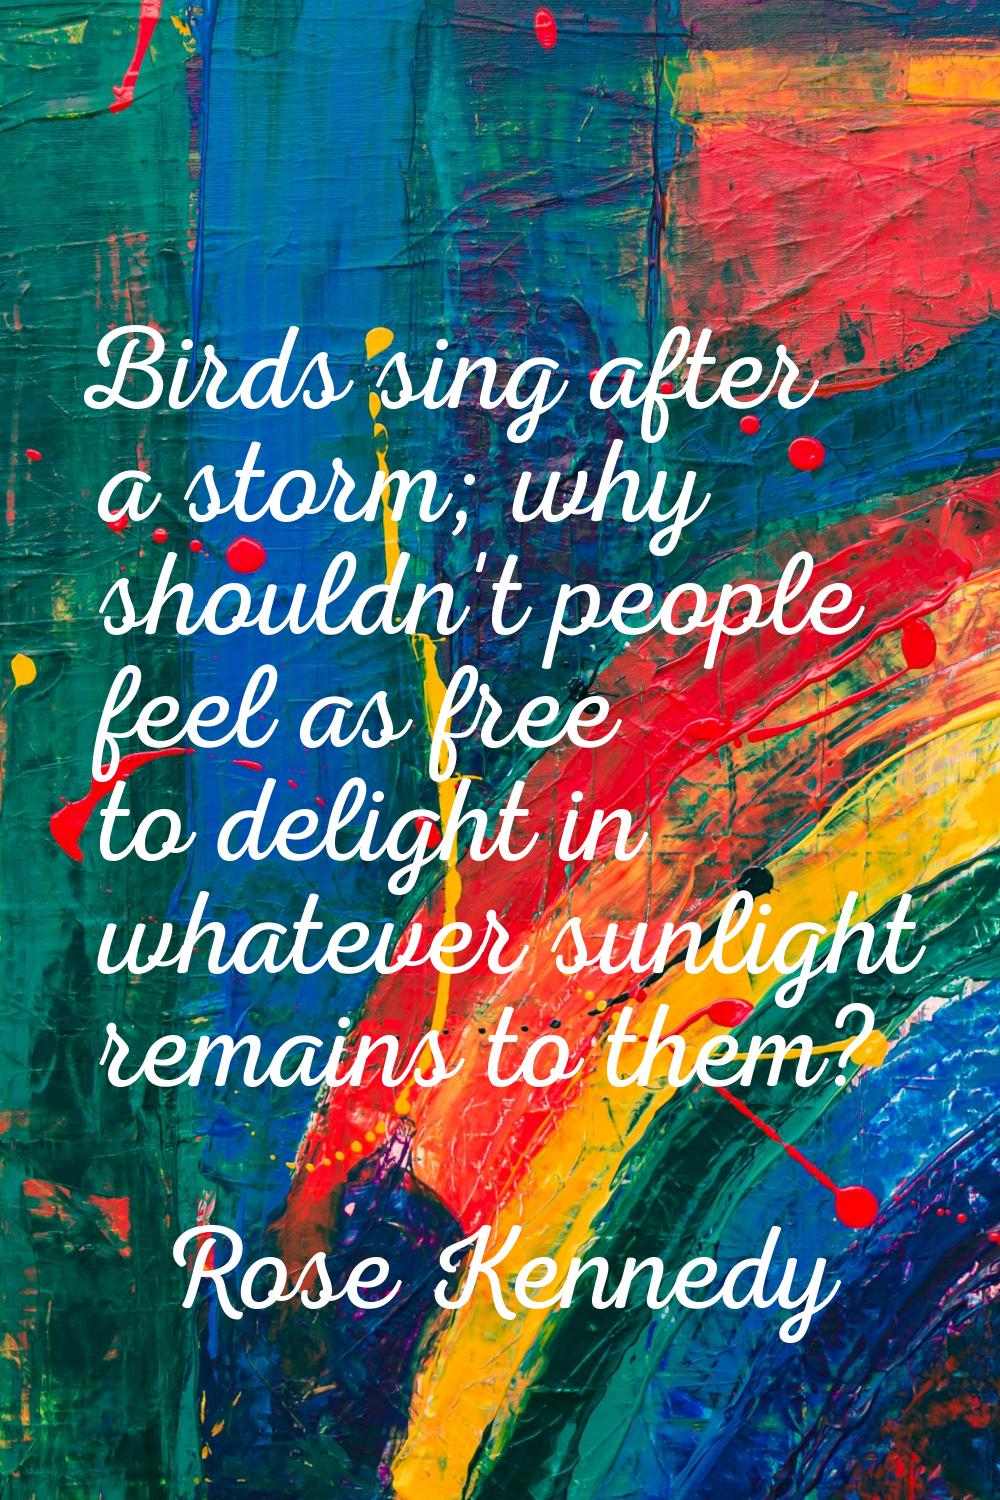 Birds sing after a storm; why shouldn't people feel as free to delight in whatever sunlight remains